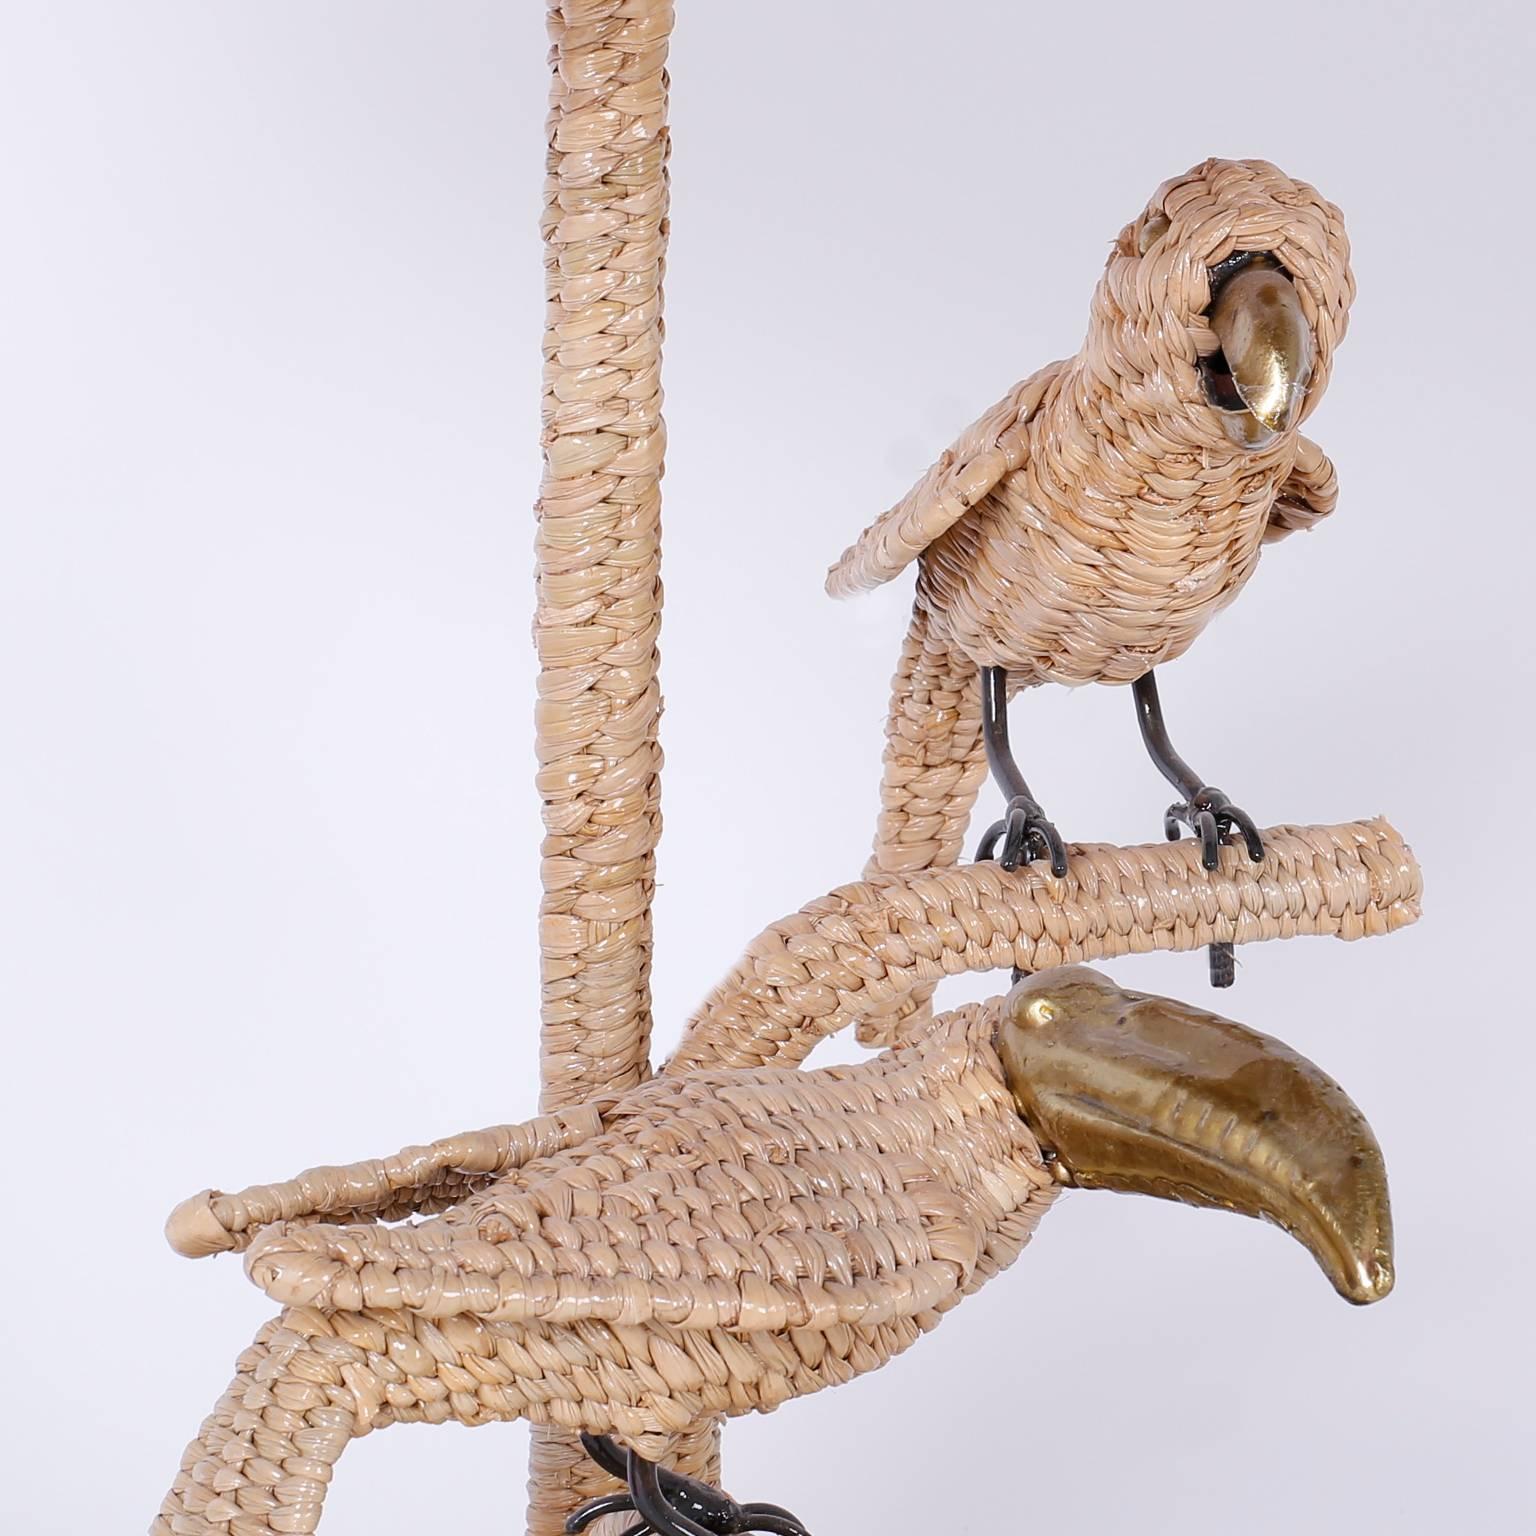 Amusing wicker bird table lamp with a parrot and toucan. Crafted with reed wrapped over a metal frame. Signed Mario Torres on a medallion.